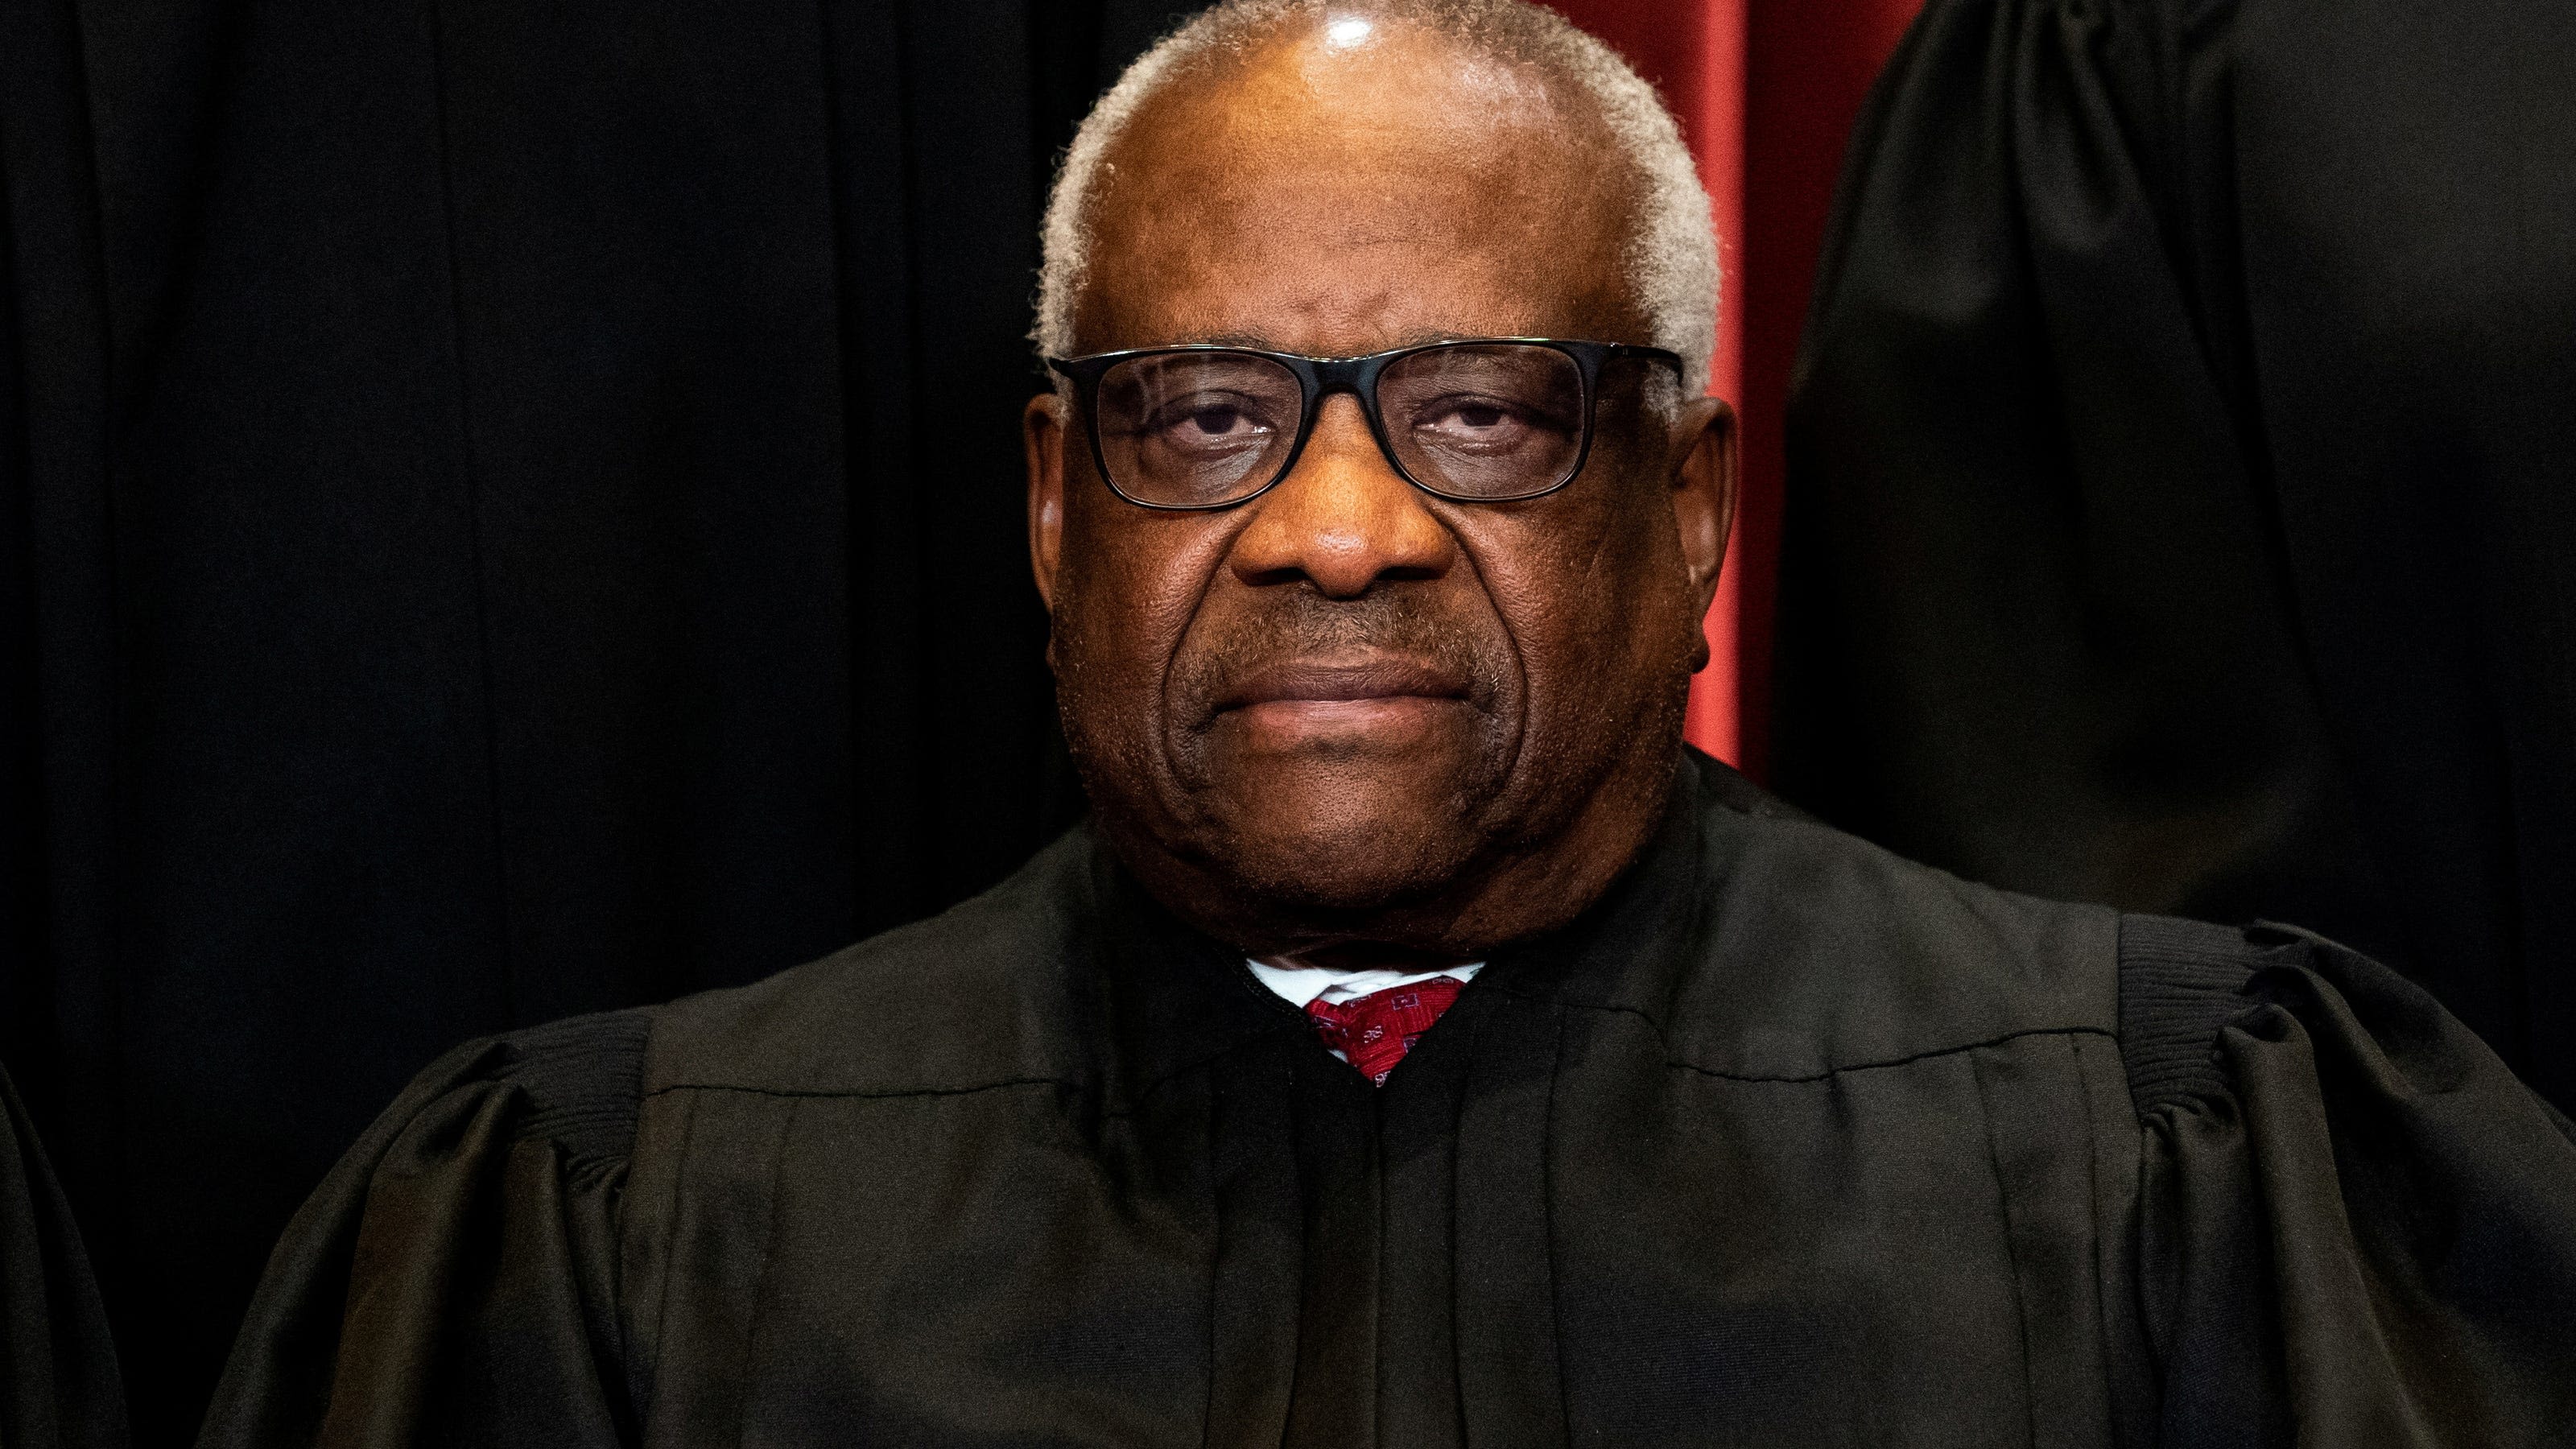 Clarence Thomas dismisses criticism of him and his wife as 'nastiness' and 'lies': Reports